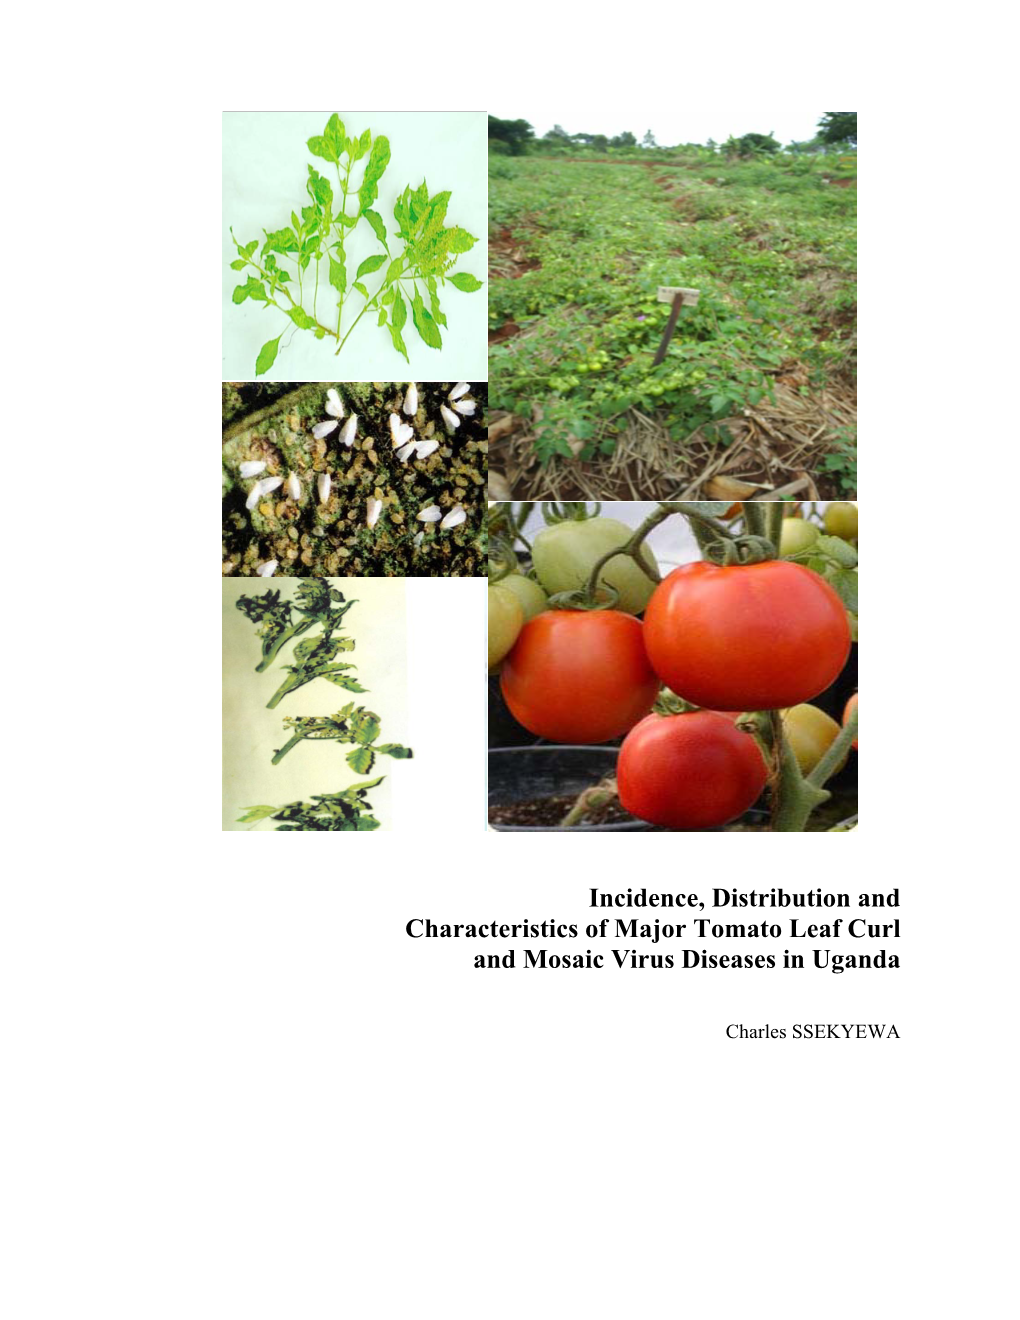 Incidence, Distribution and Characteristics of Major Tomato Leaf Curl and Mosaic Virus Diseases in Uganda